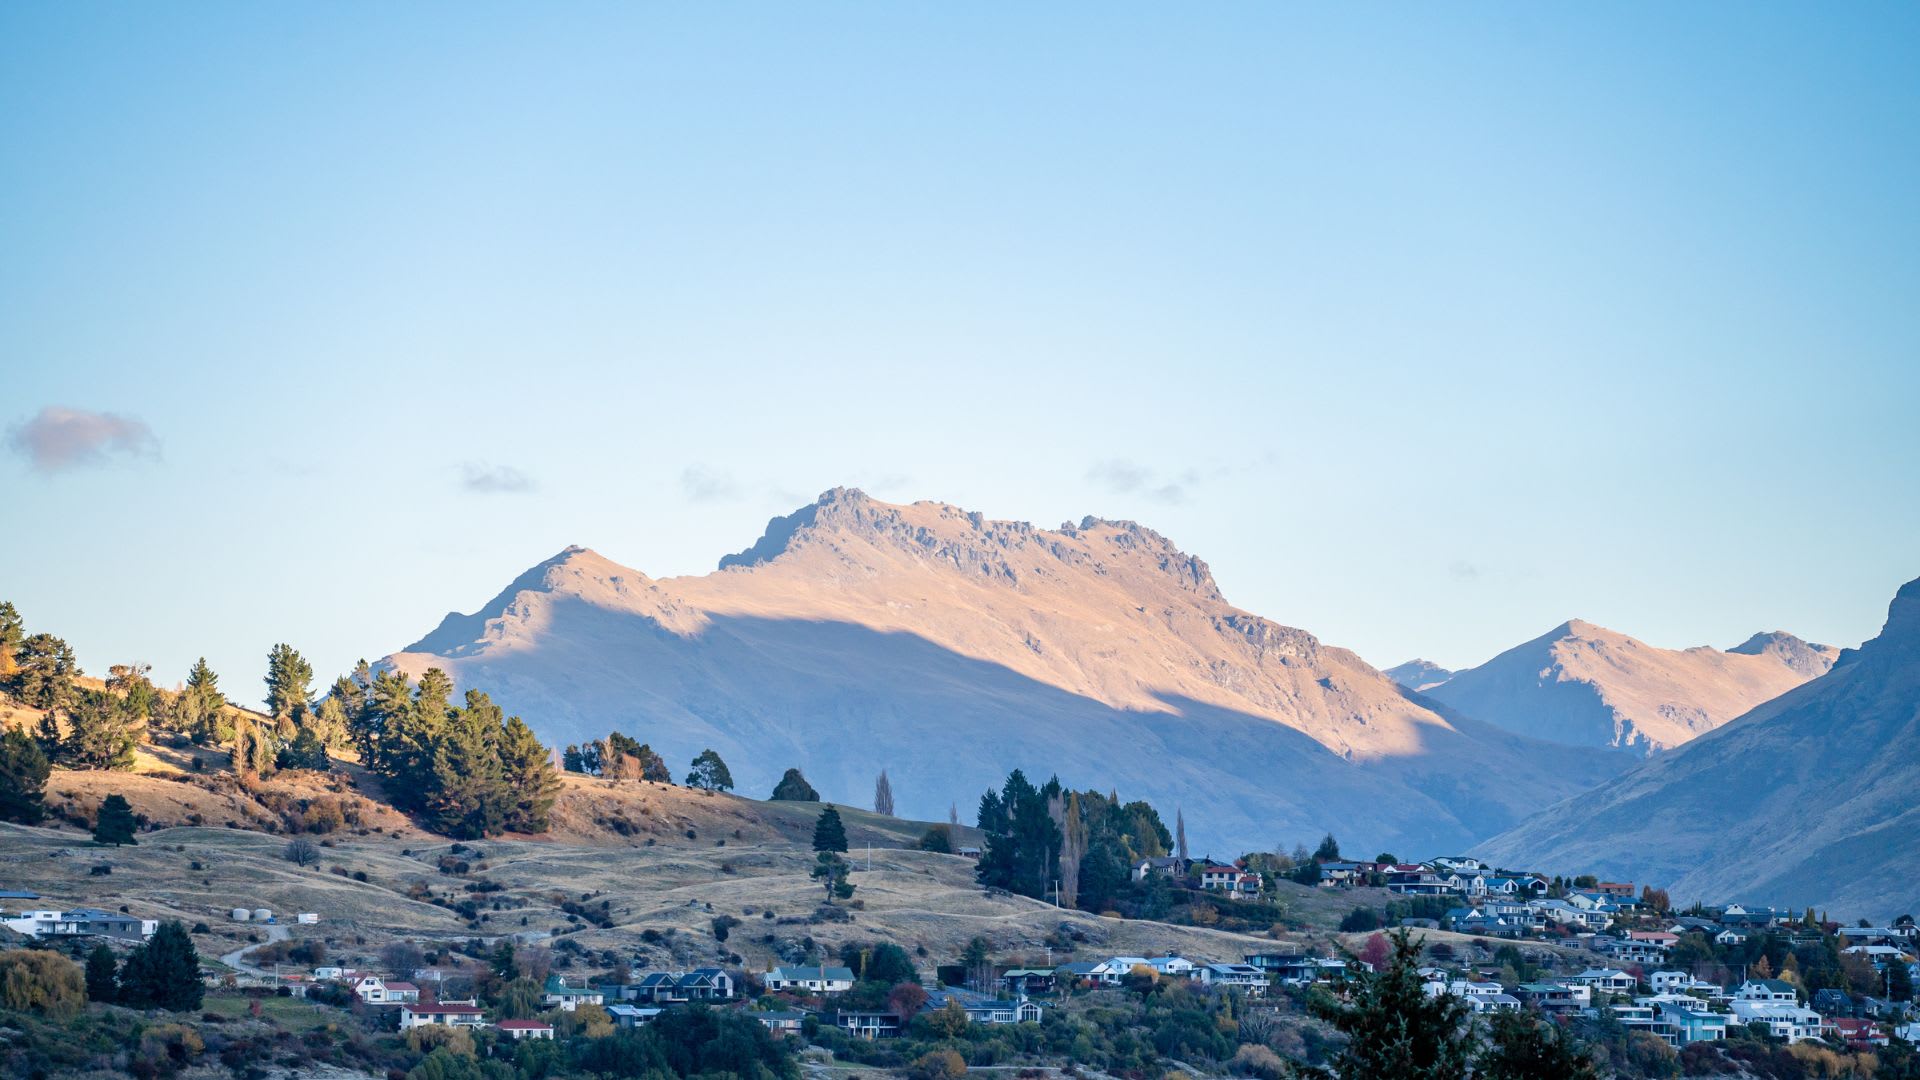 Experience wonderful mountain views from our 5 star accommodation, Queenstown